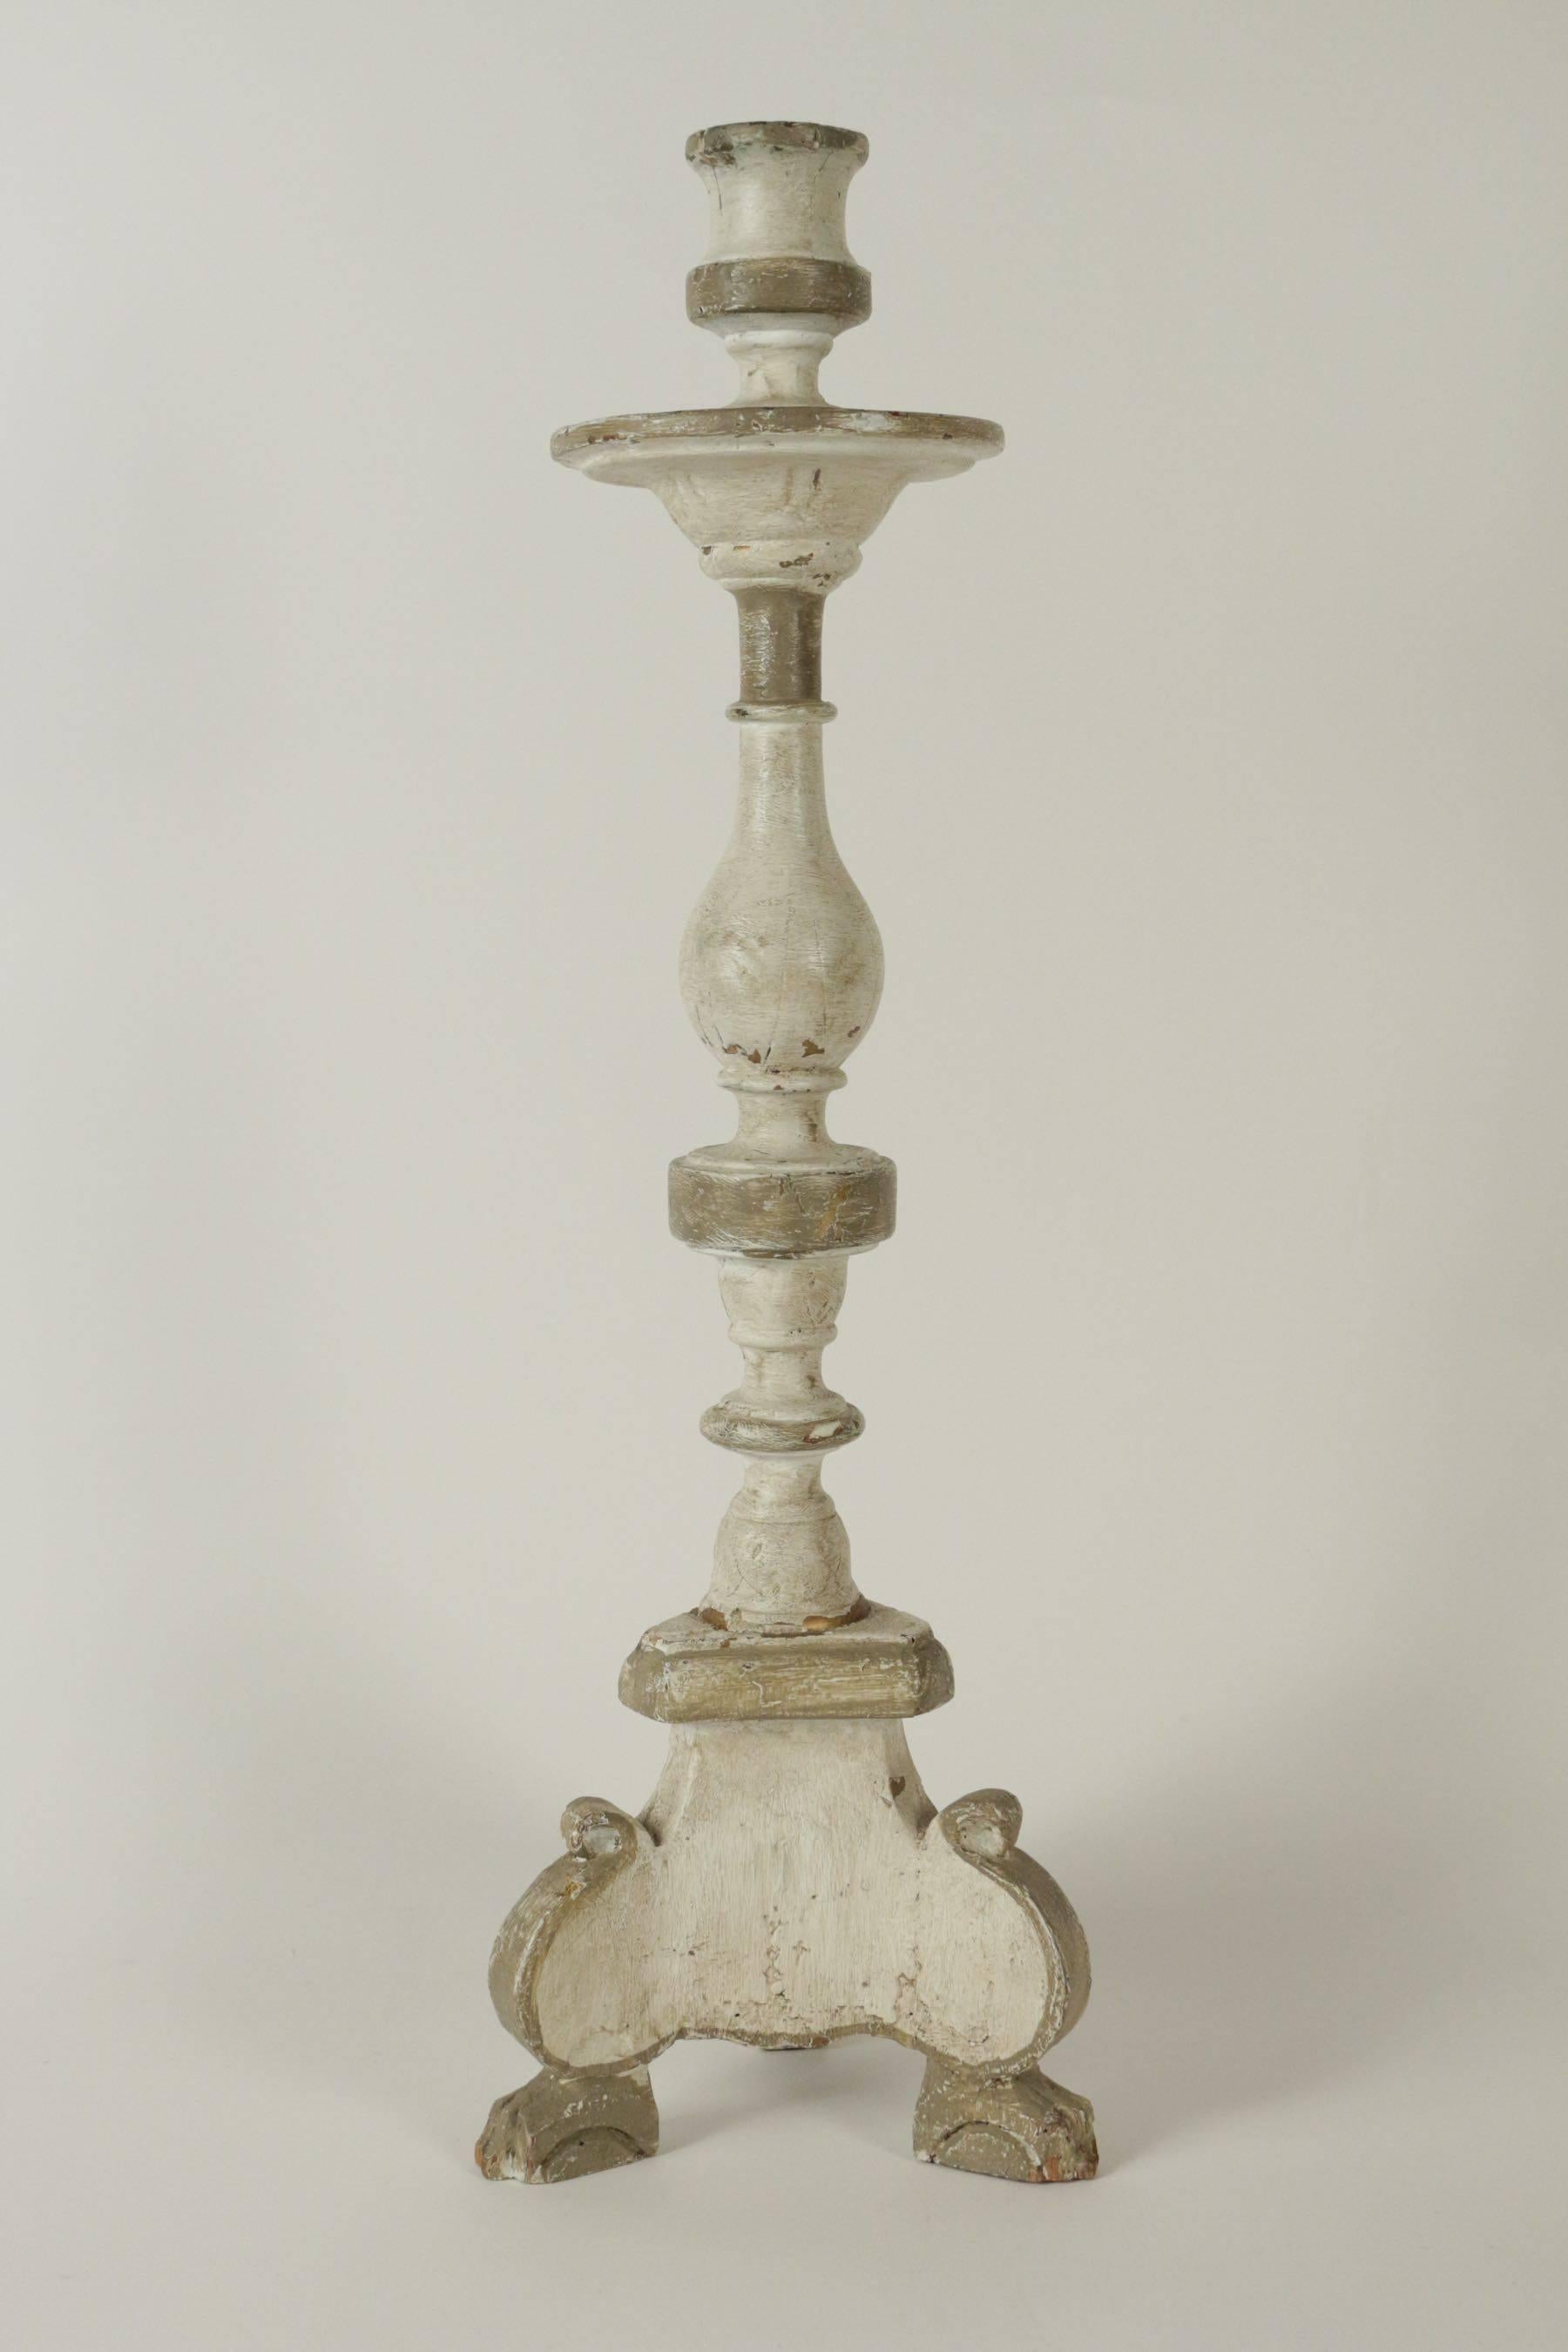 Louis XIII Candle Stick in Sculpted Wood from the 19th Century Repainted in 20th Century